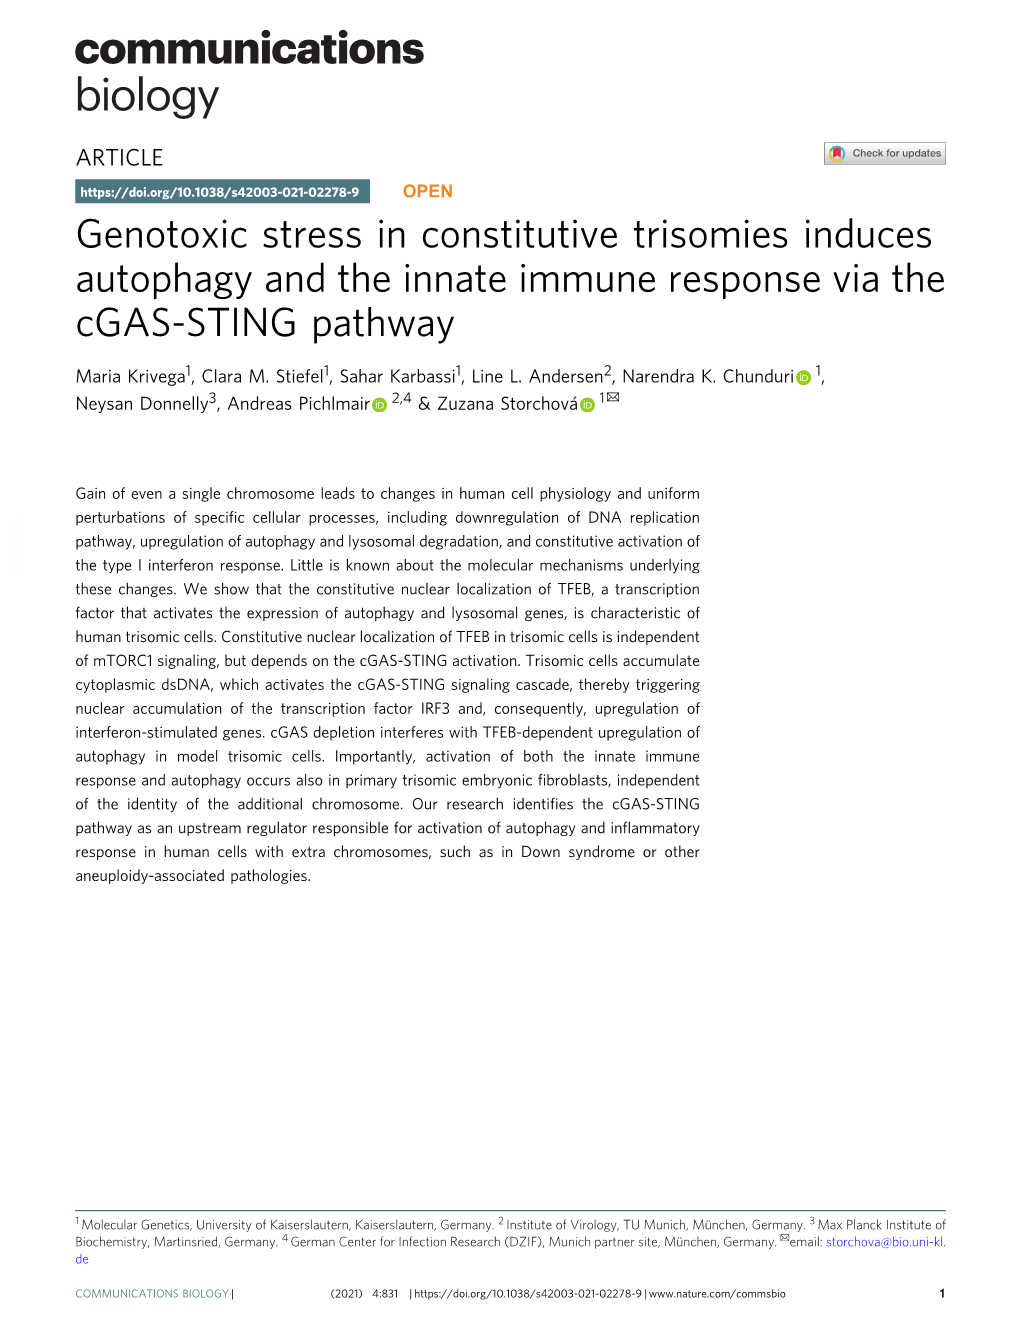 Genotoxic Stress in Constitutive Trisomies Induces Autophagy and the Innate Immune Response Via the Cgas-STING Pathway